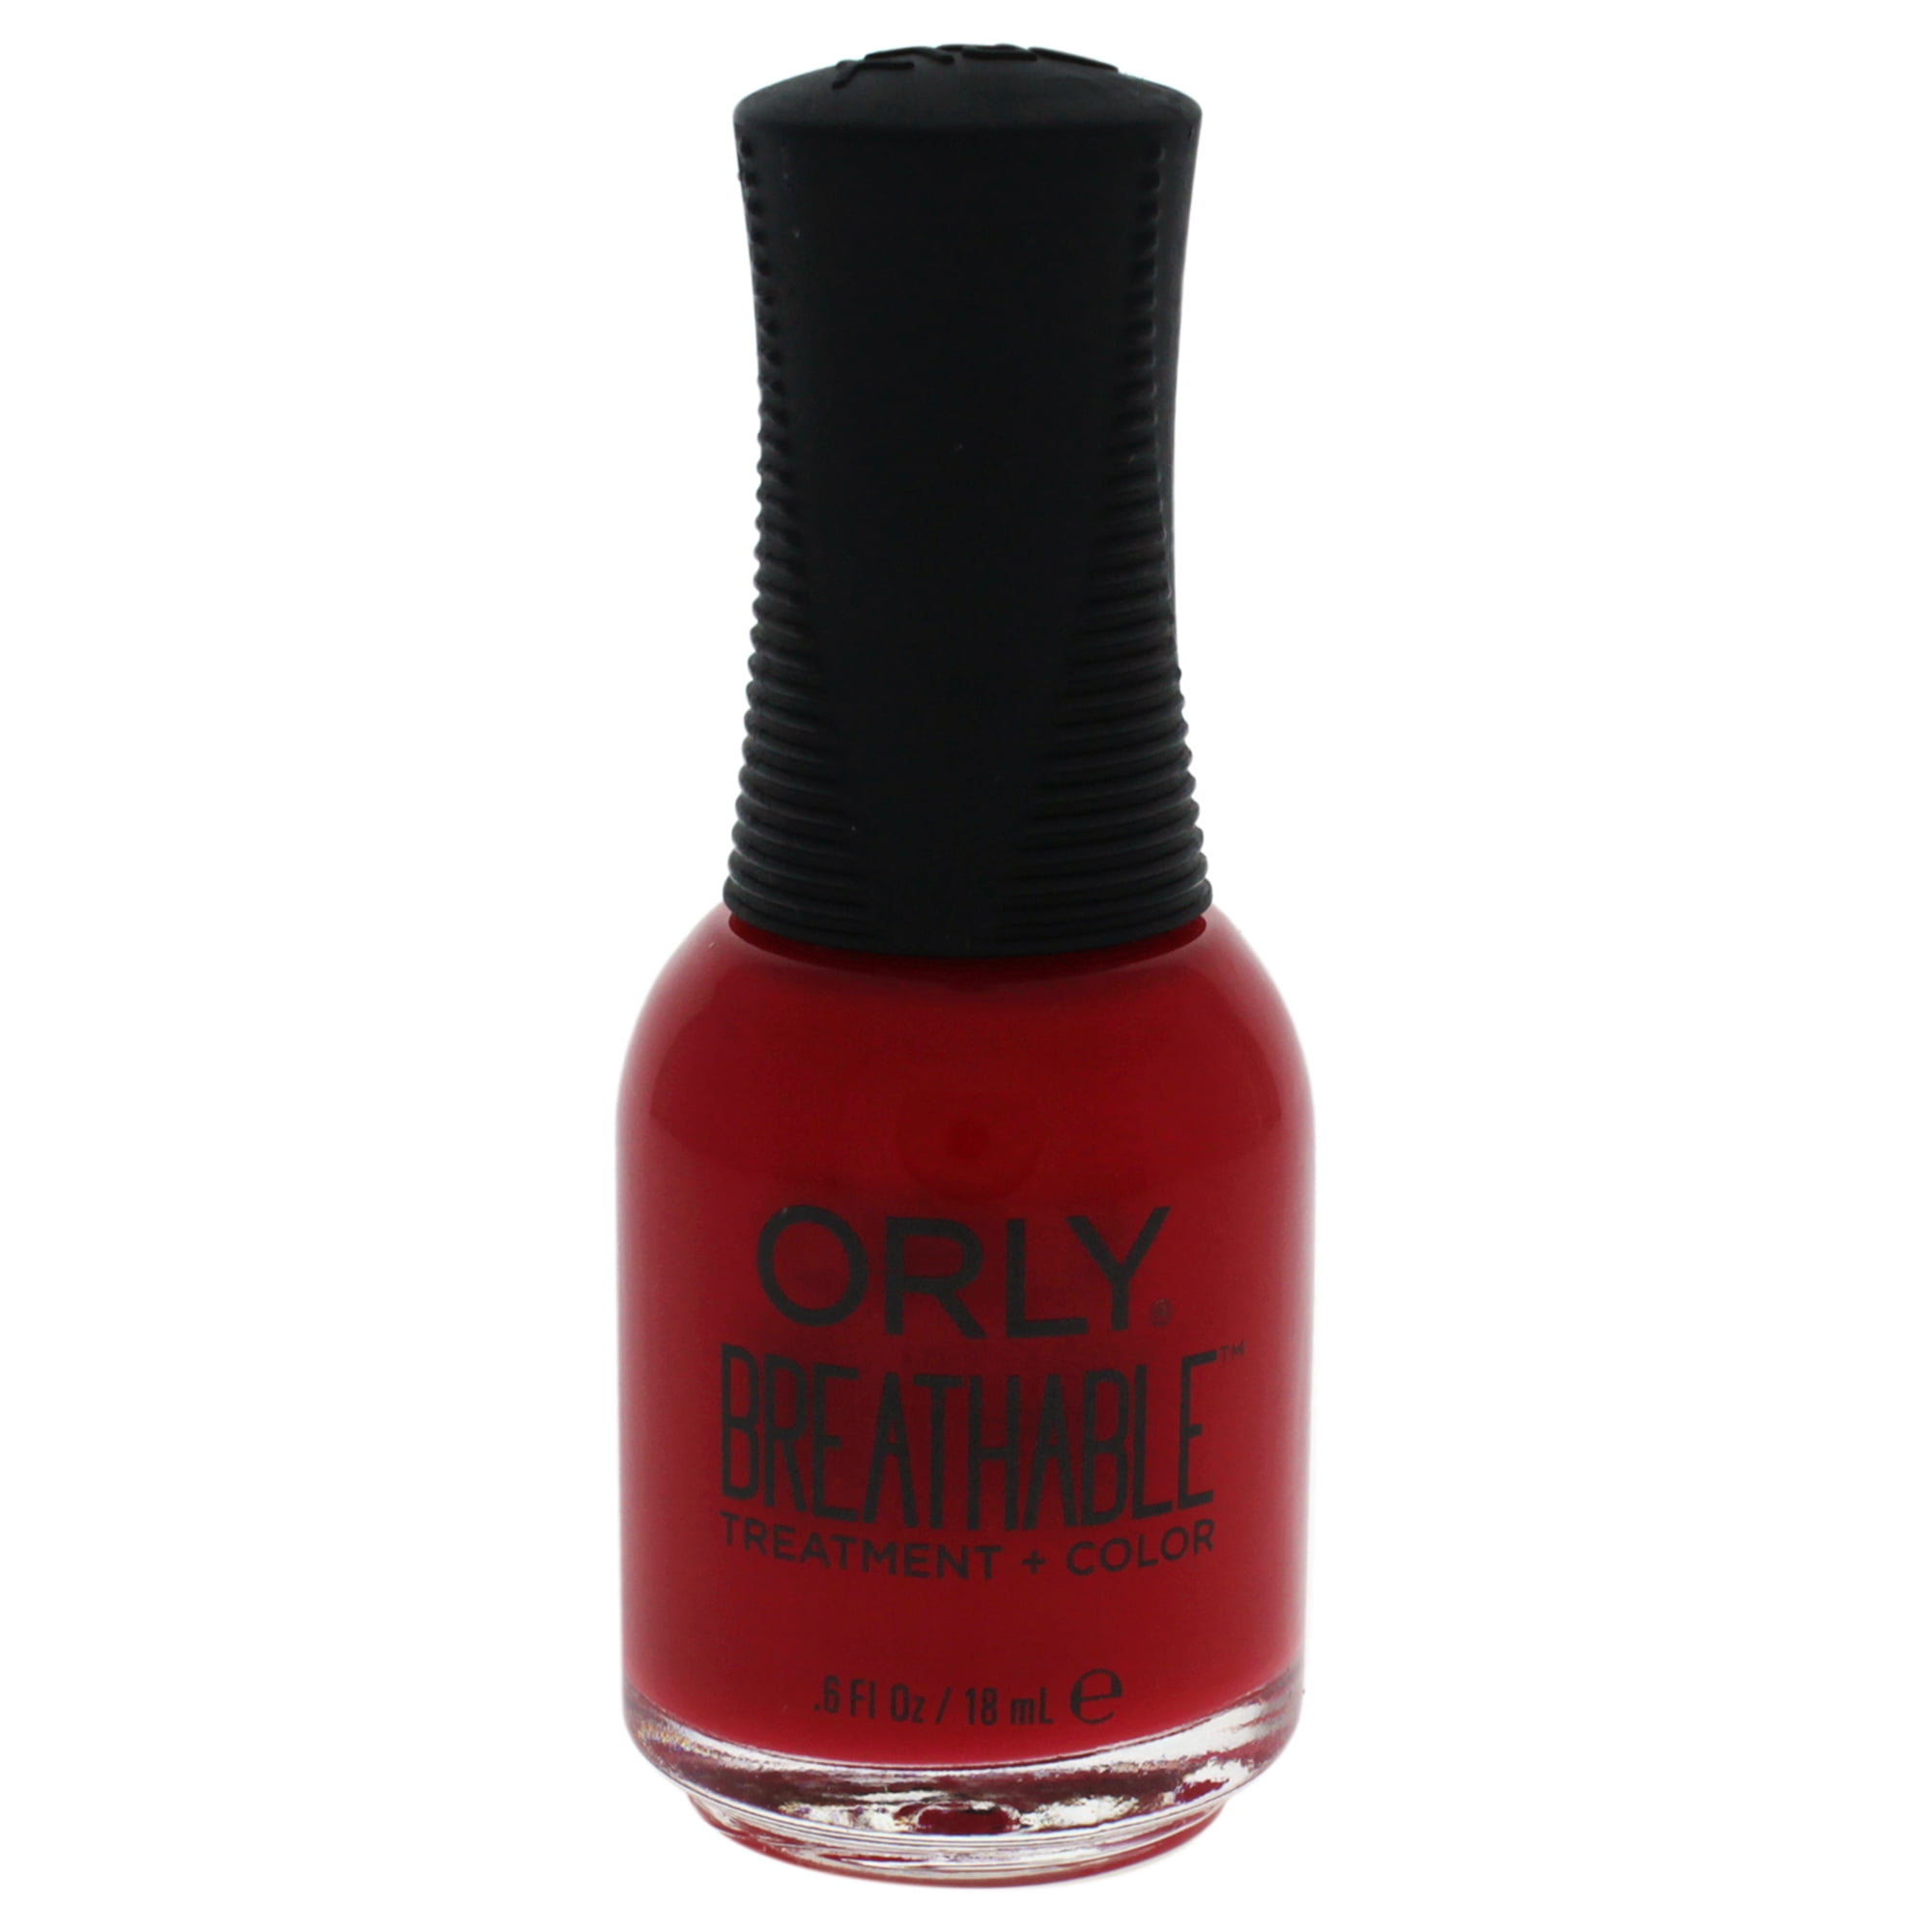 Orly Breathable Treatment + Color Walmart.com